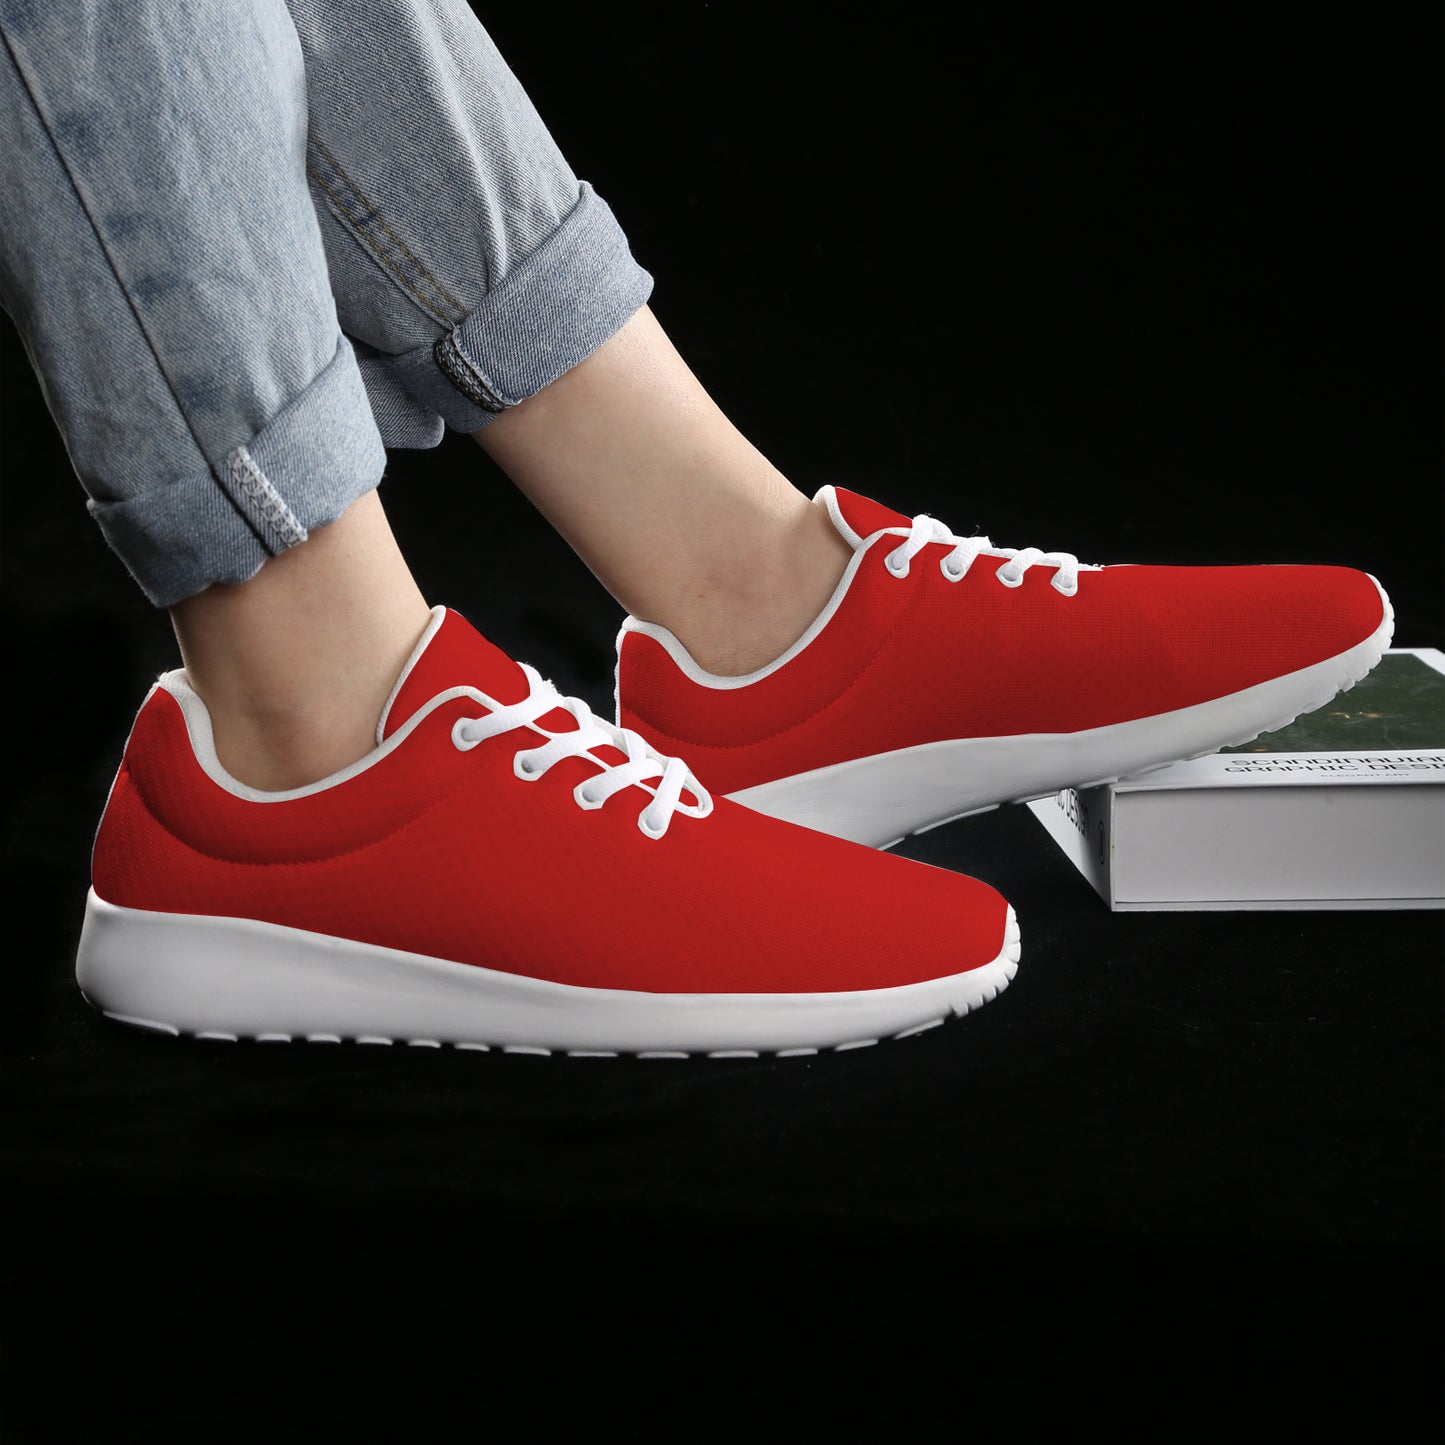 Men's Athletic Shoes - Classic Red